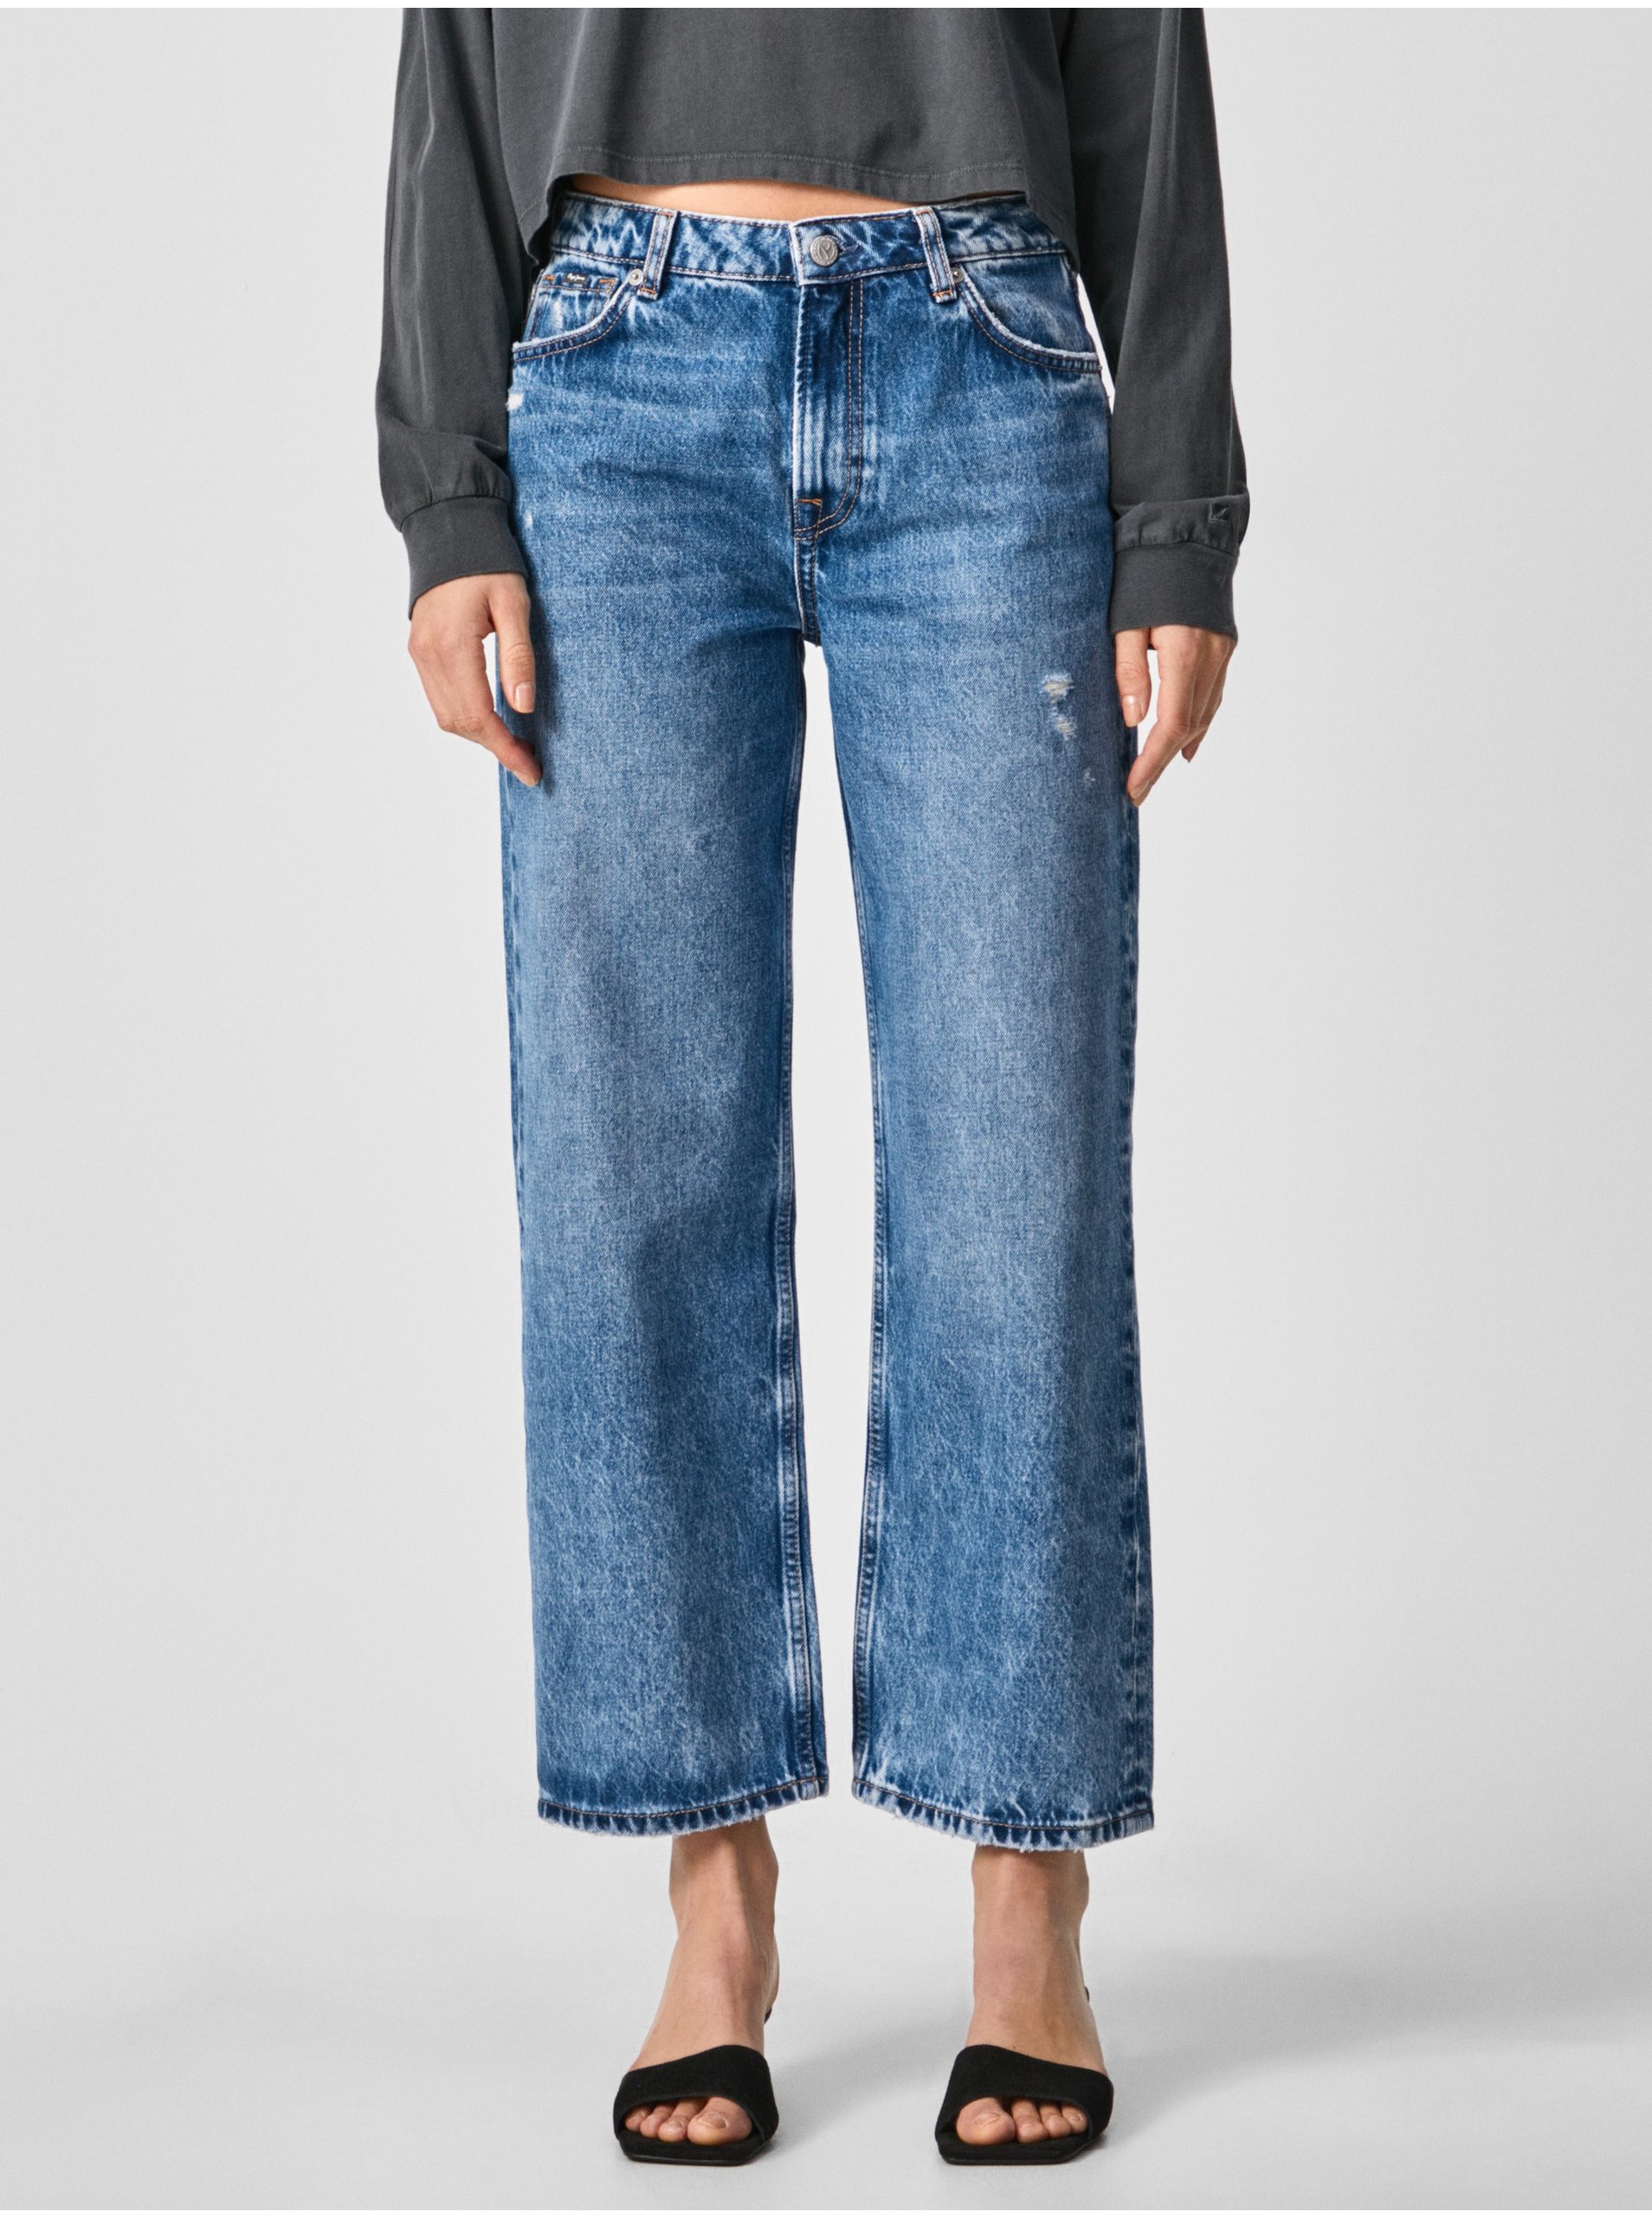 Jeans De Mujer Pepe Jeans